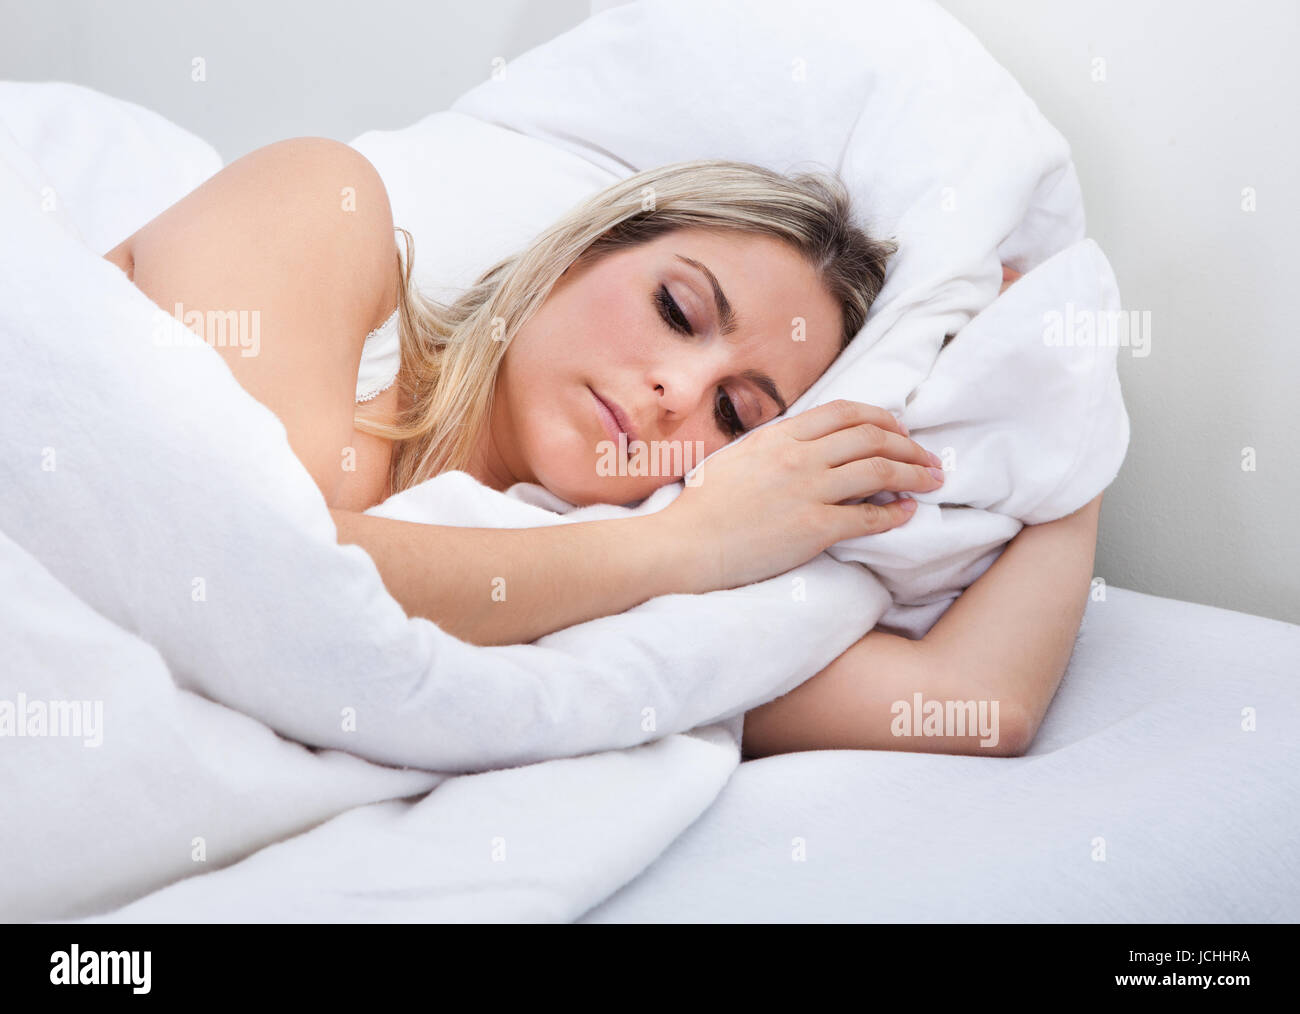 Close-up of upset woman lying on bed Stock Photo